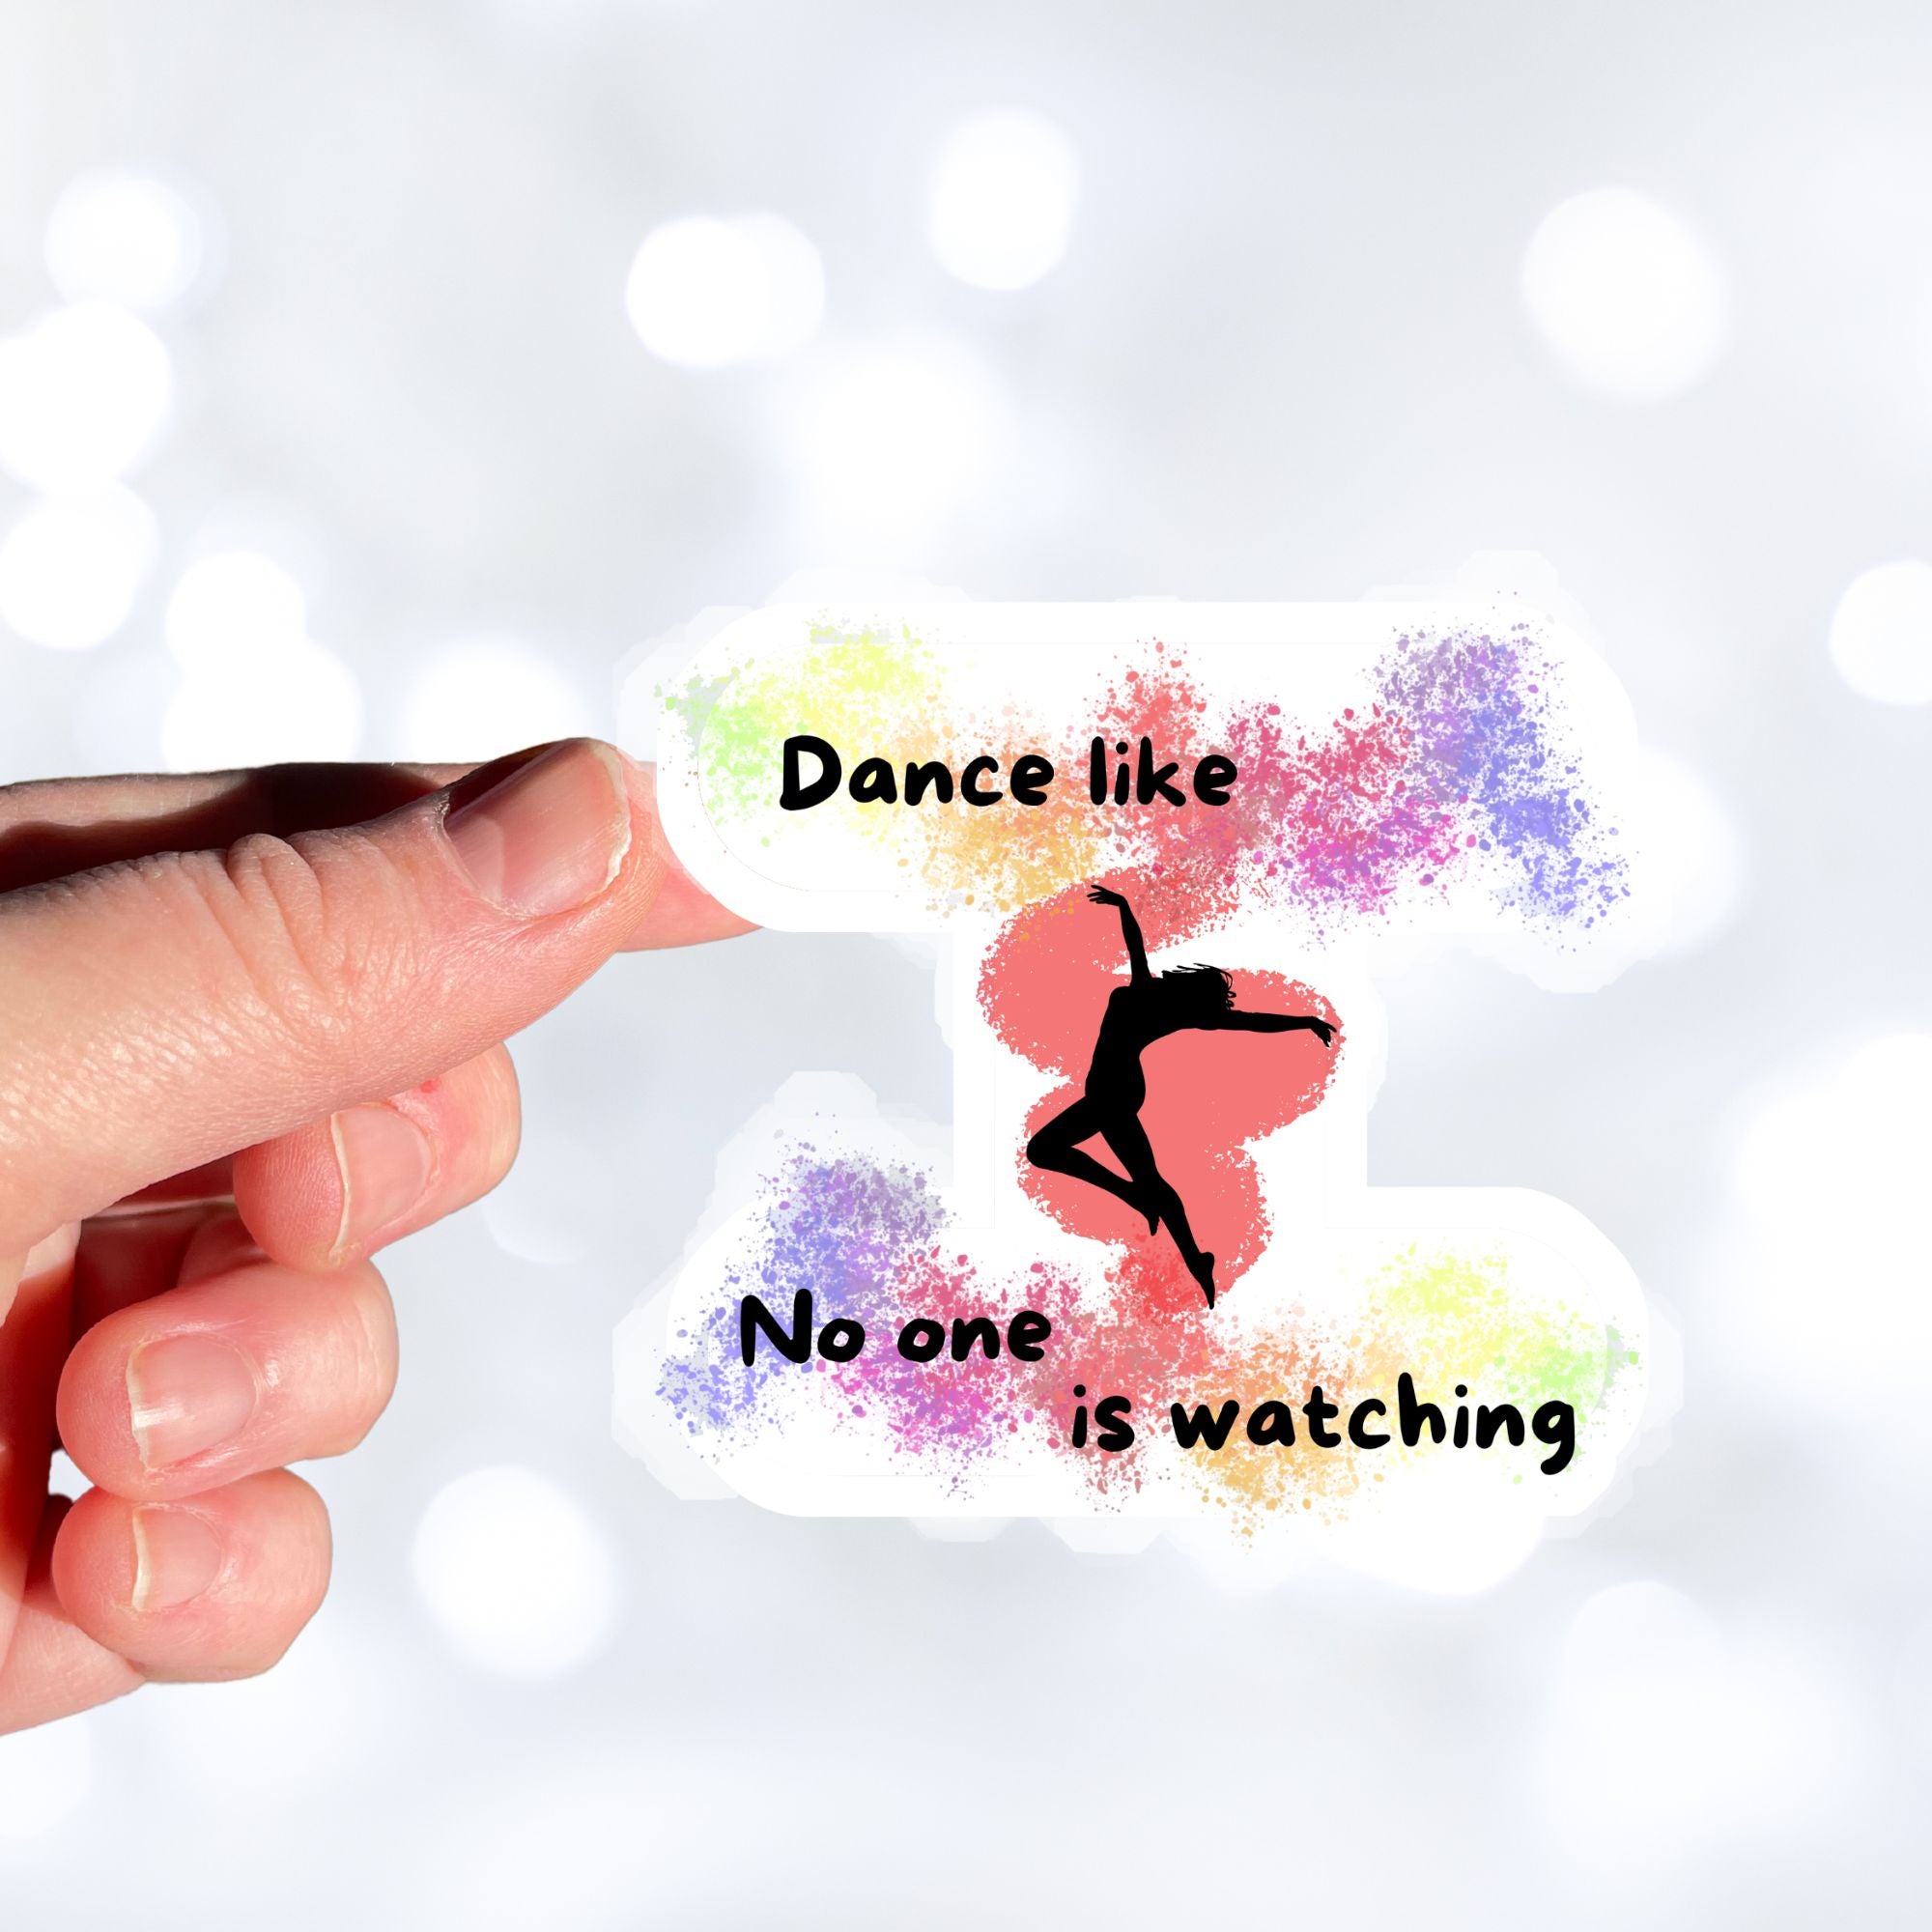 This individual die-cut sticker is perfect for anyone who loves to dance! It features the silhouette of a dancer in the center with the words "Dance like No one is watching", all on a spray paint pastel background. Check out our Inspirational collection for more inspiring stickers! This image shows a hand holding the Dance like No one is watching sticker.